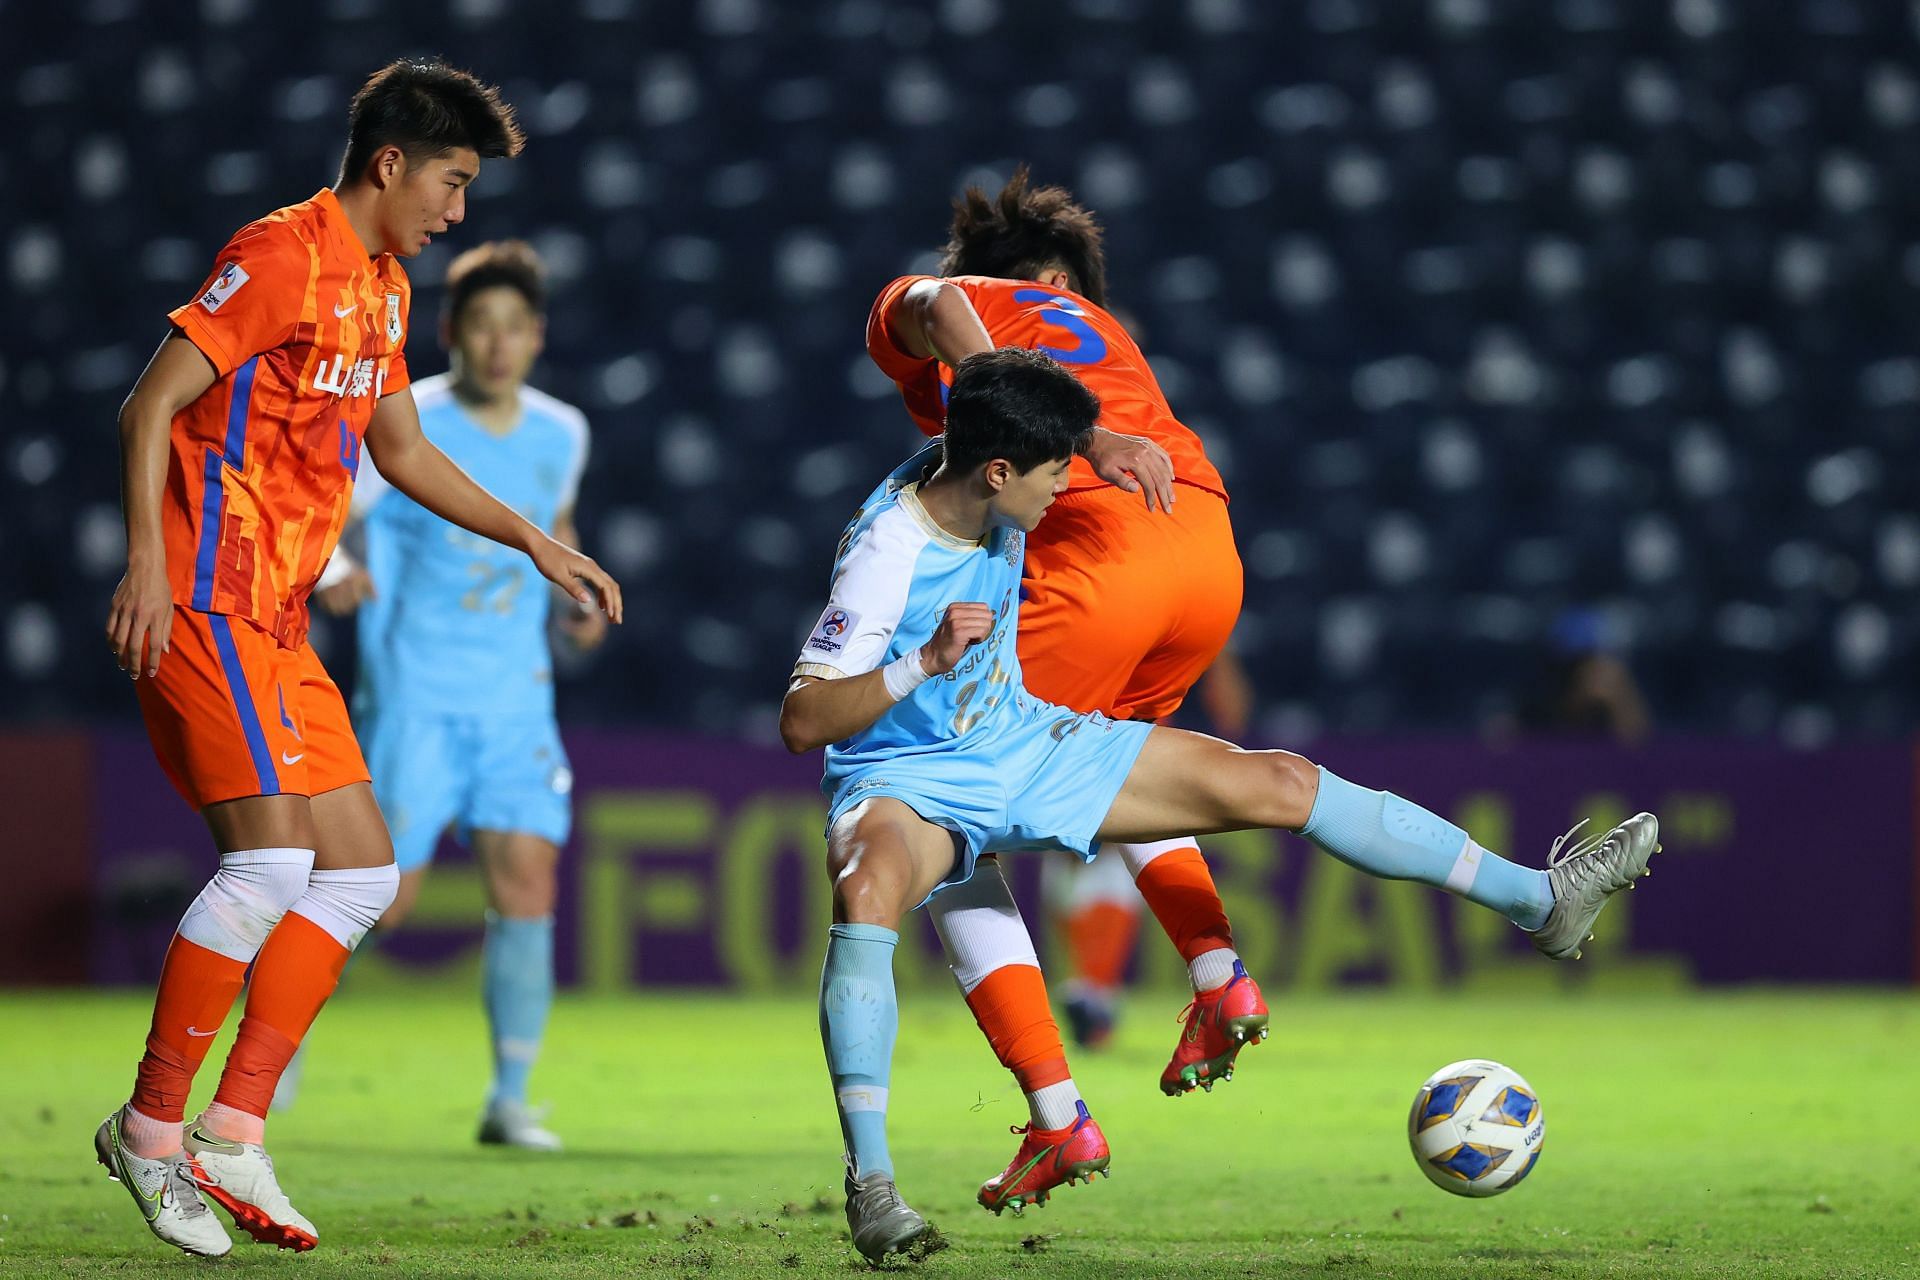 Daegu ran out 4-0 winners over Shandong Taishan in the penultimate round.